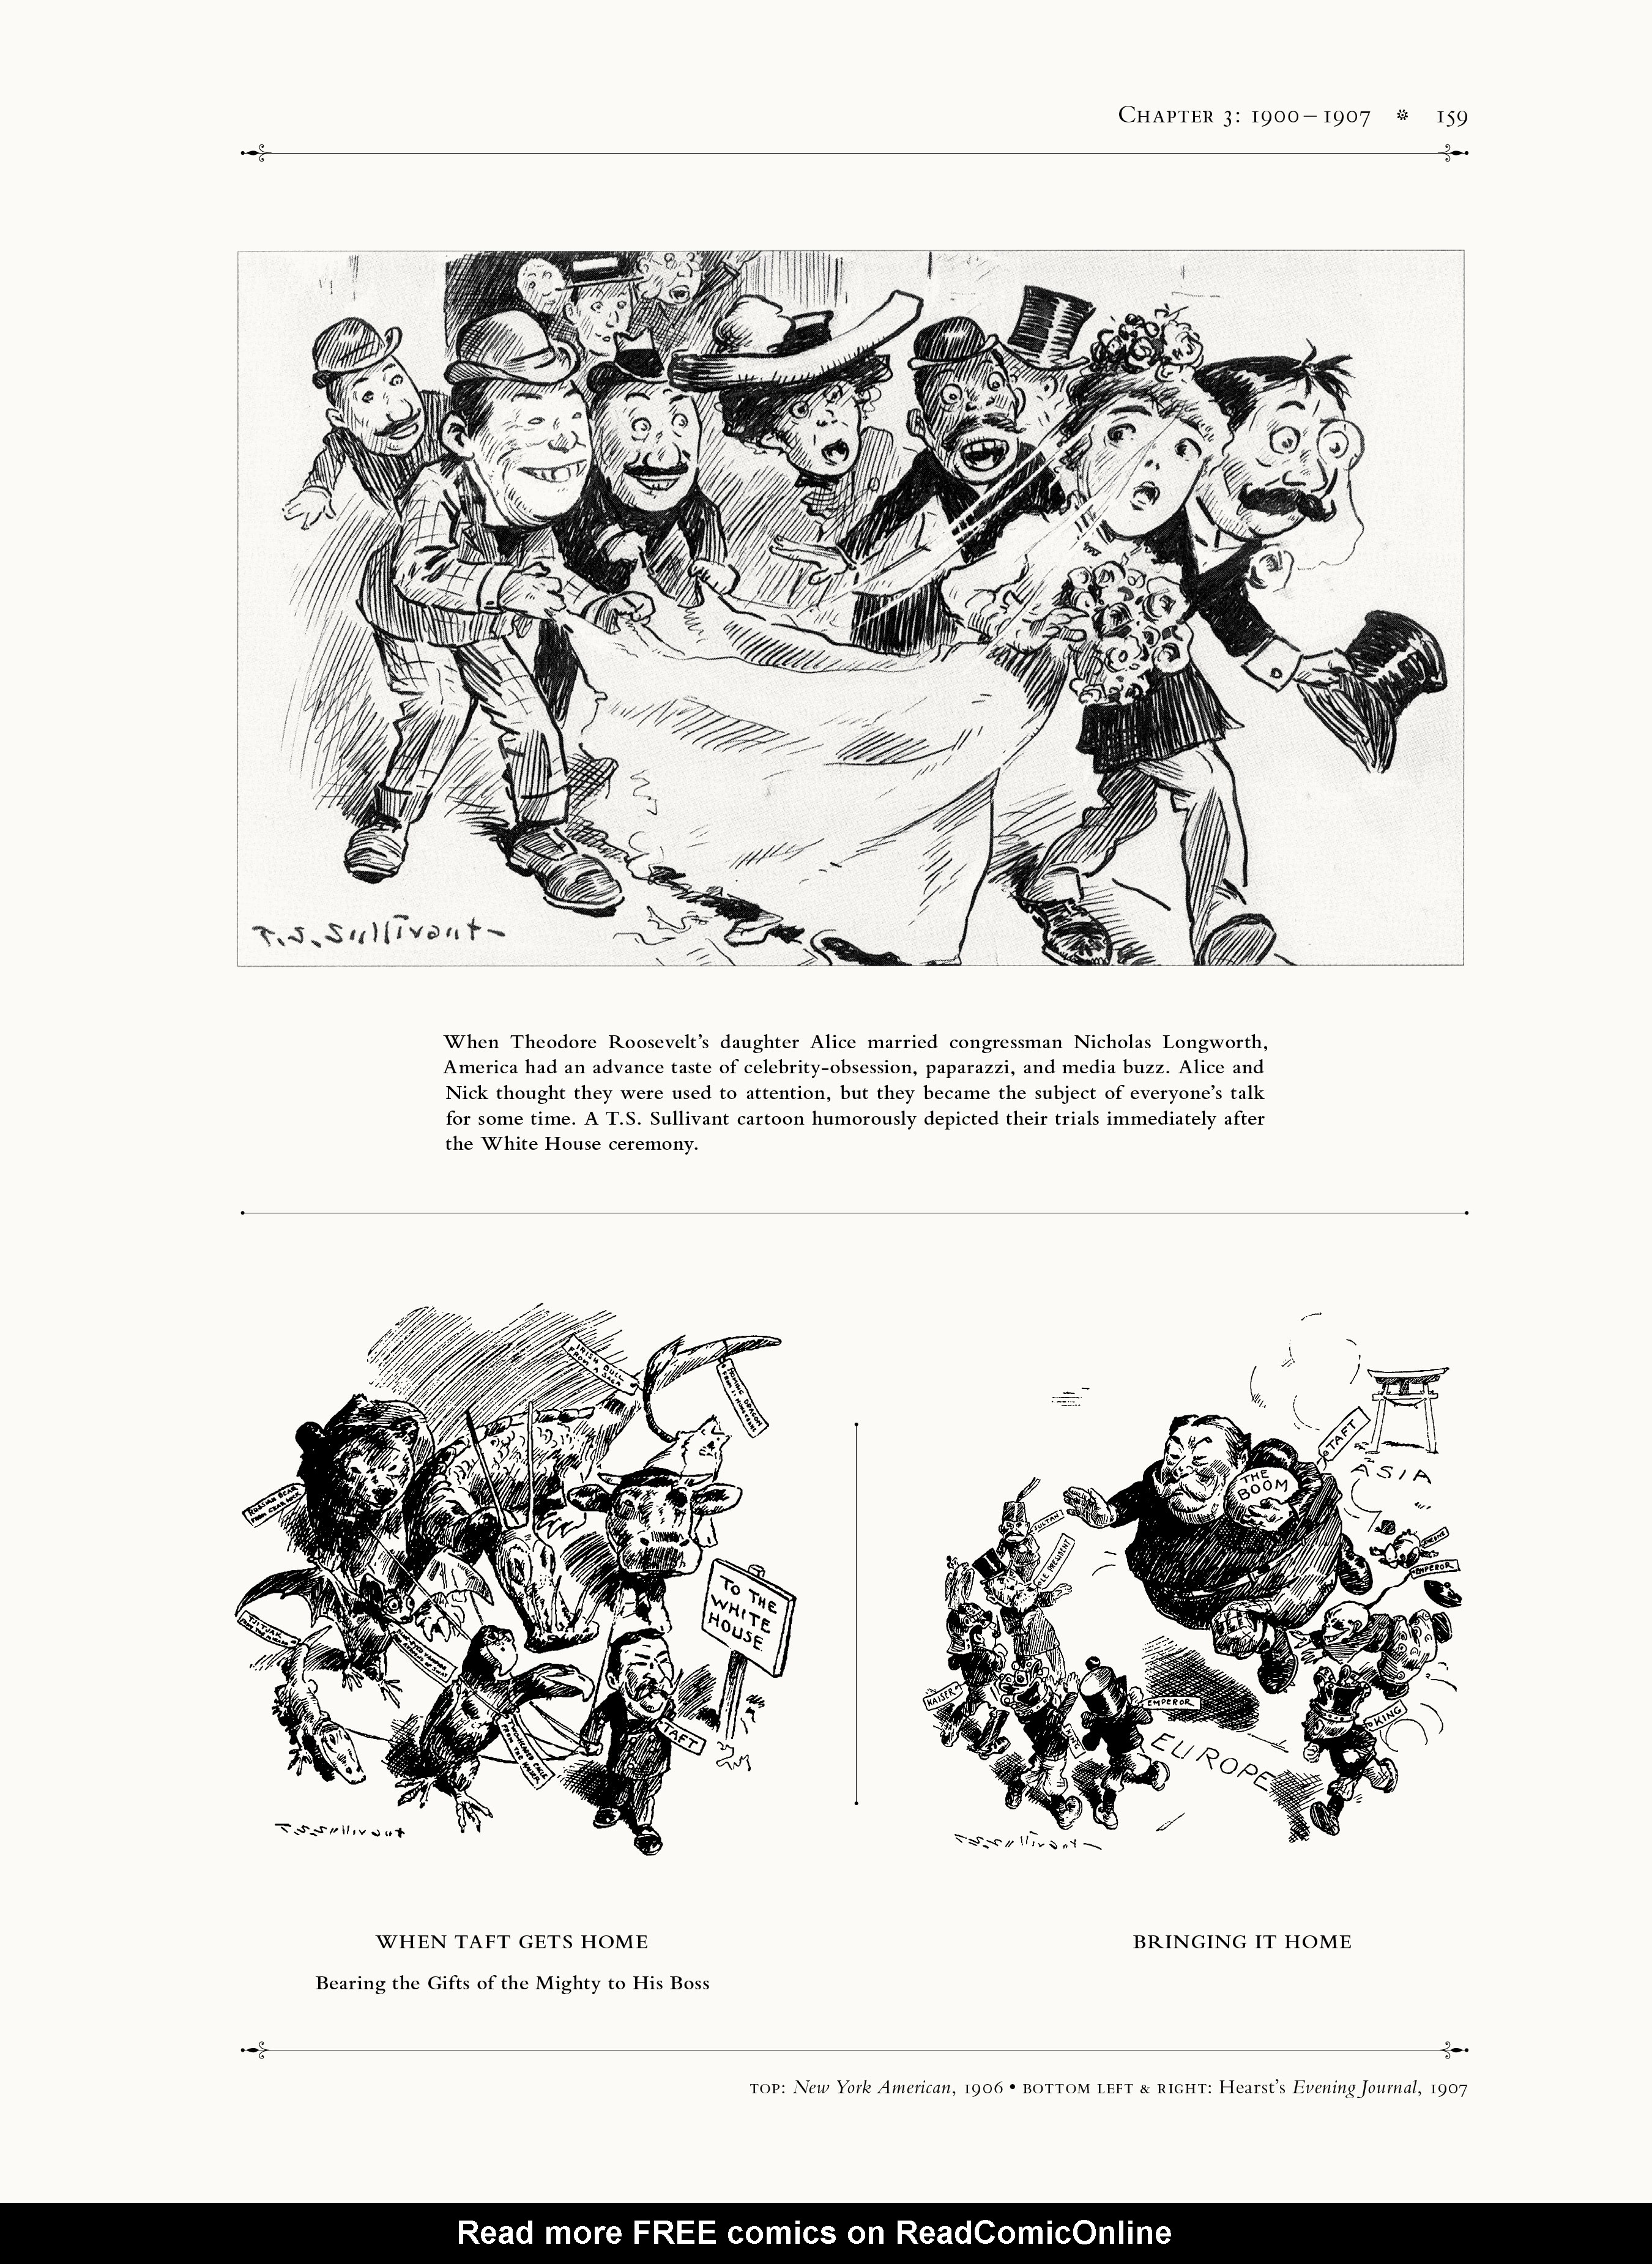 Read online A Cockeyed Menagerie: The Drawings of T.S. Sullivant comic -  Issue # TPB (Part 2) - 71